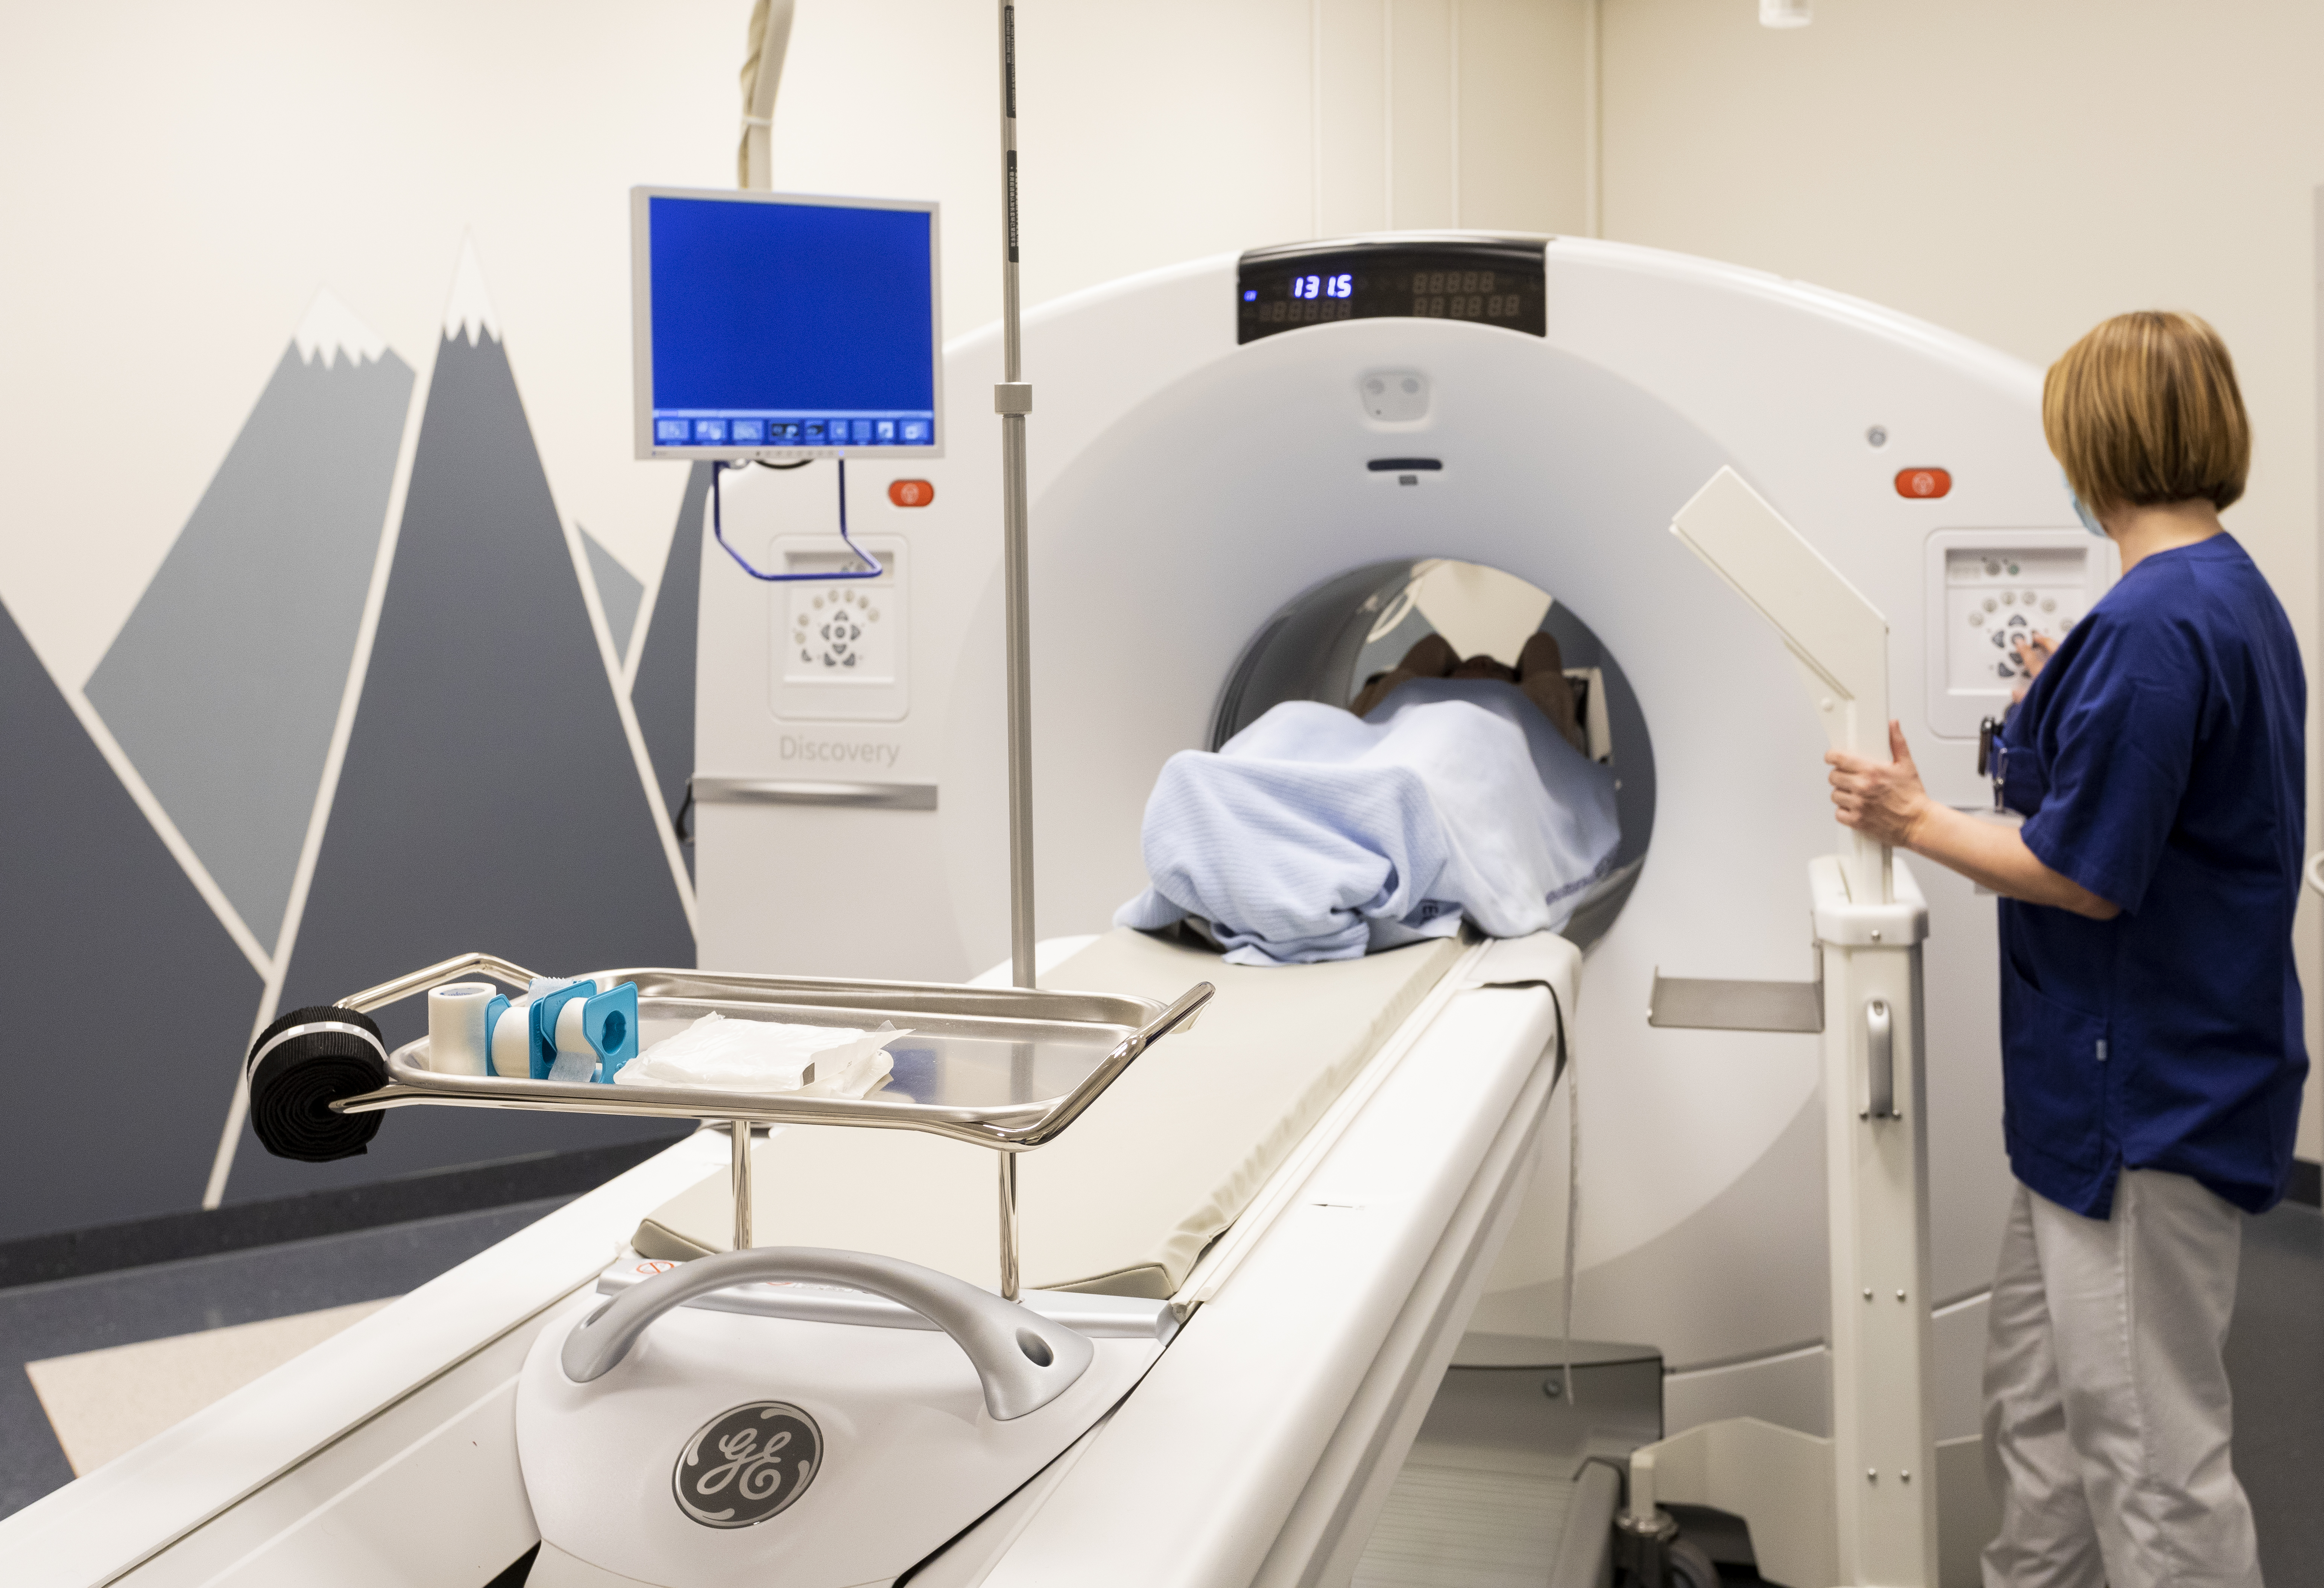 The PET/CT system has the potential to enable an exceptionally high sensitivity of 30 cps/kBq and includes a CT designed to allow TrueFidelity™ deep-learning image reconstruction to enable image sharpness and improved noise texture.